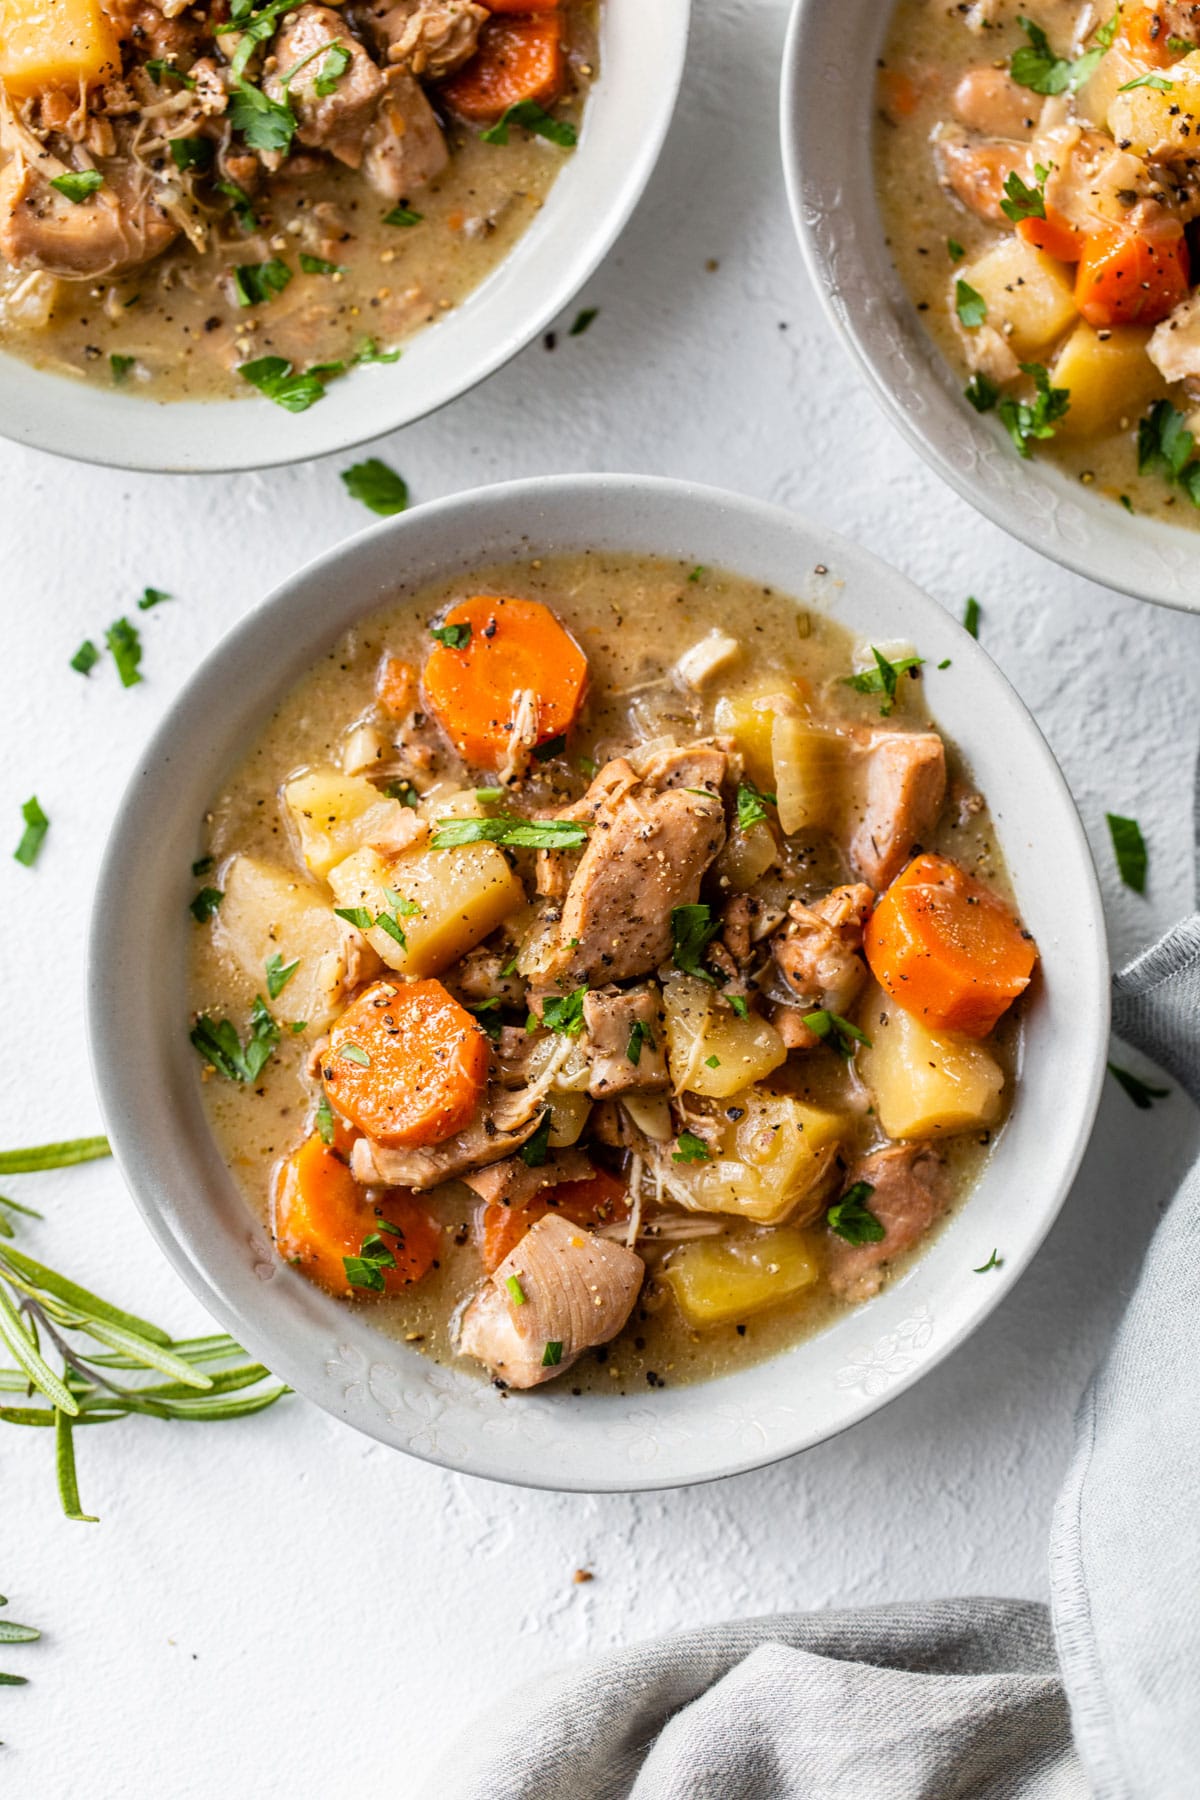 three bowls of stew with chicken, carrots and potatoes